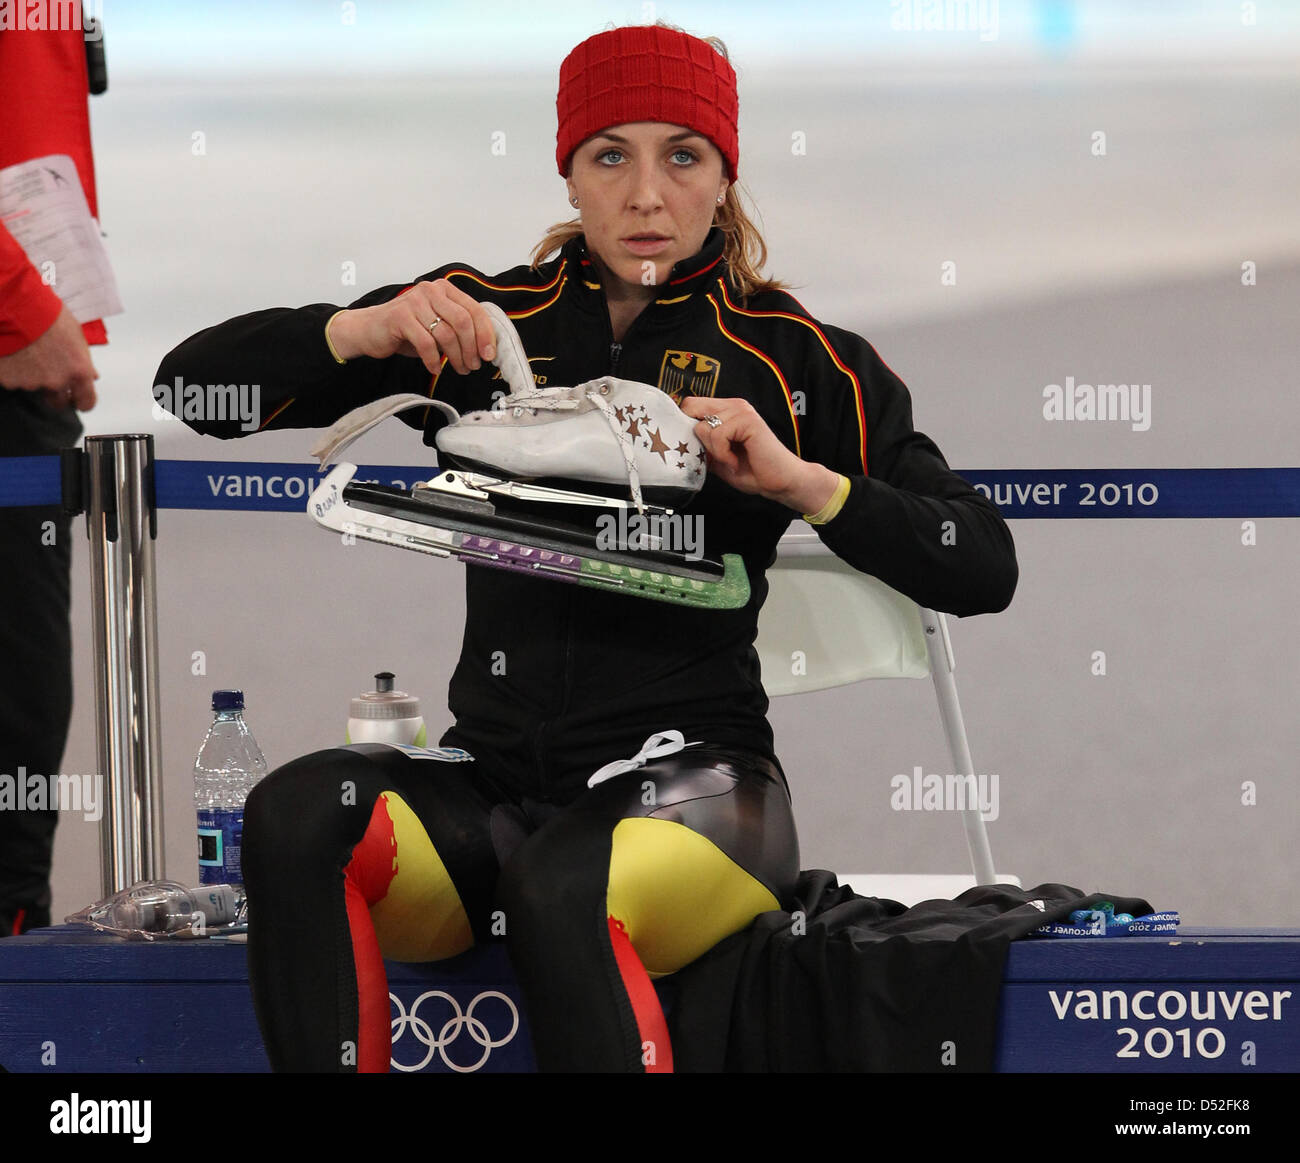 Anni Friesinger-Postma of Germany prepares for the Speed Skating Women's team pursuit quarterfinal at the Richmond Olympic Oval during the Vancouver 2010 Olympic Games, Vancouver, Canada, 26 February 2010. Photo: Daniel Karmann  +++(c) dpa - Bildfunk+++ Stock Photo